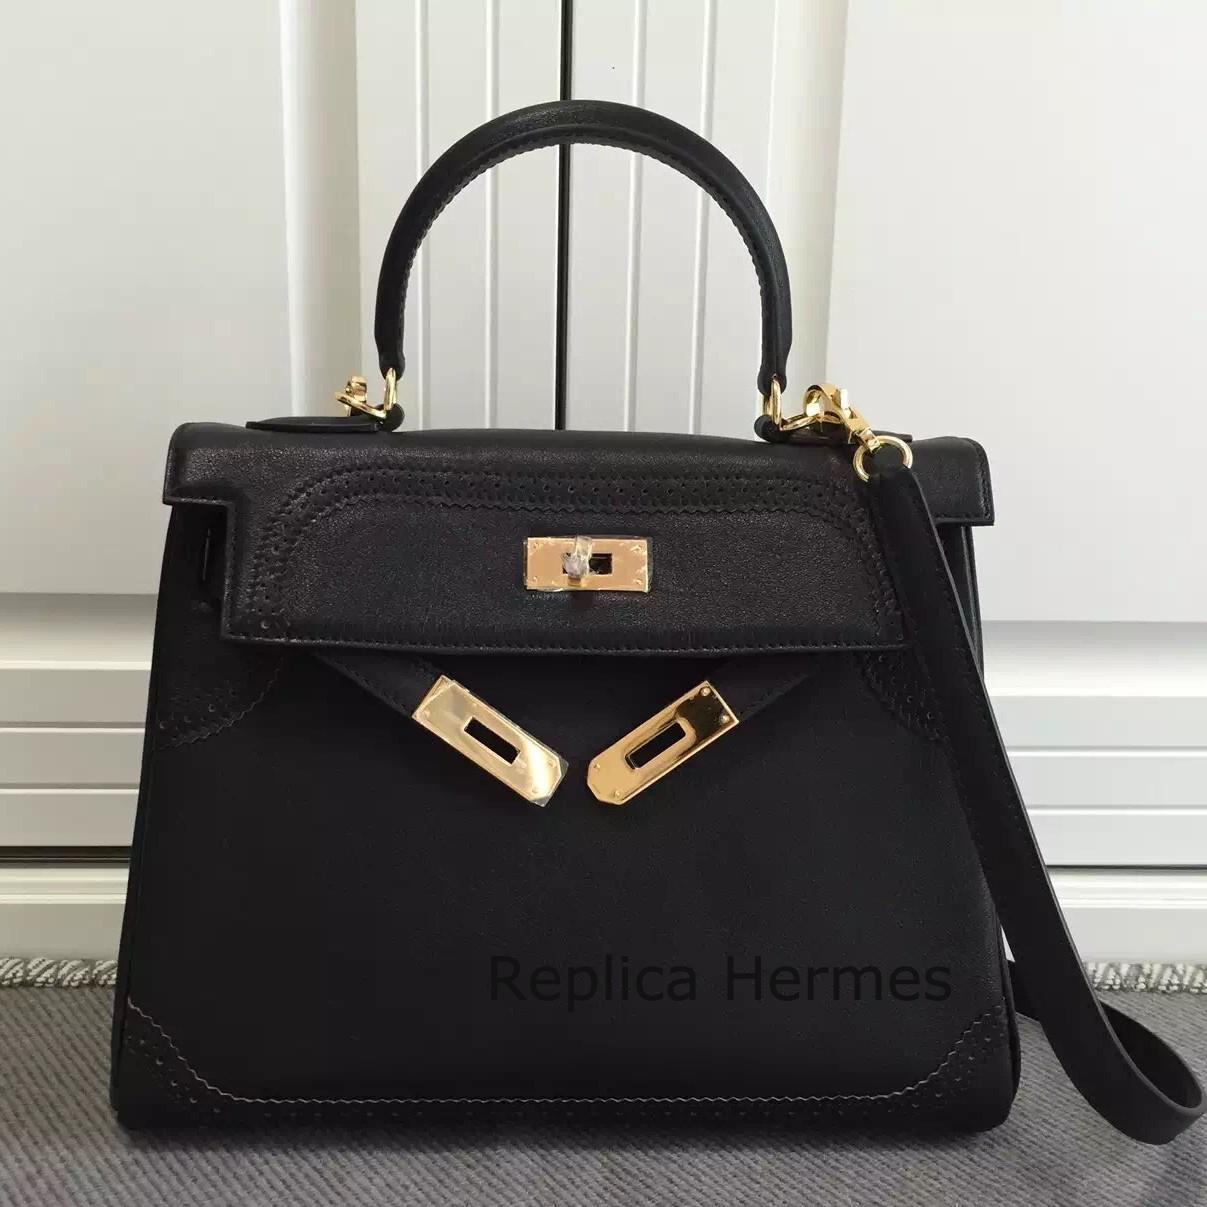 Replica Perfect Hermes Kelly Ghillies 28cm In Black Swift Leather